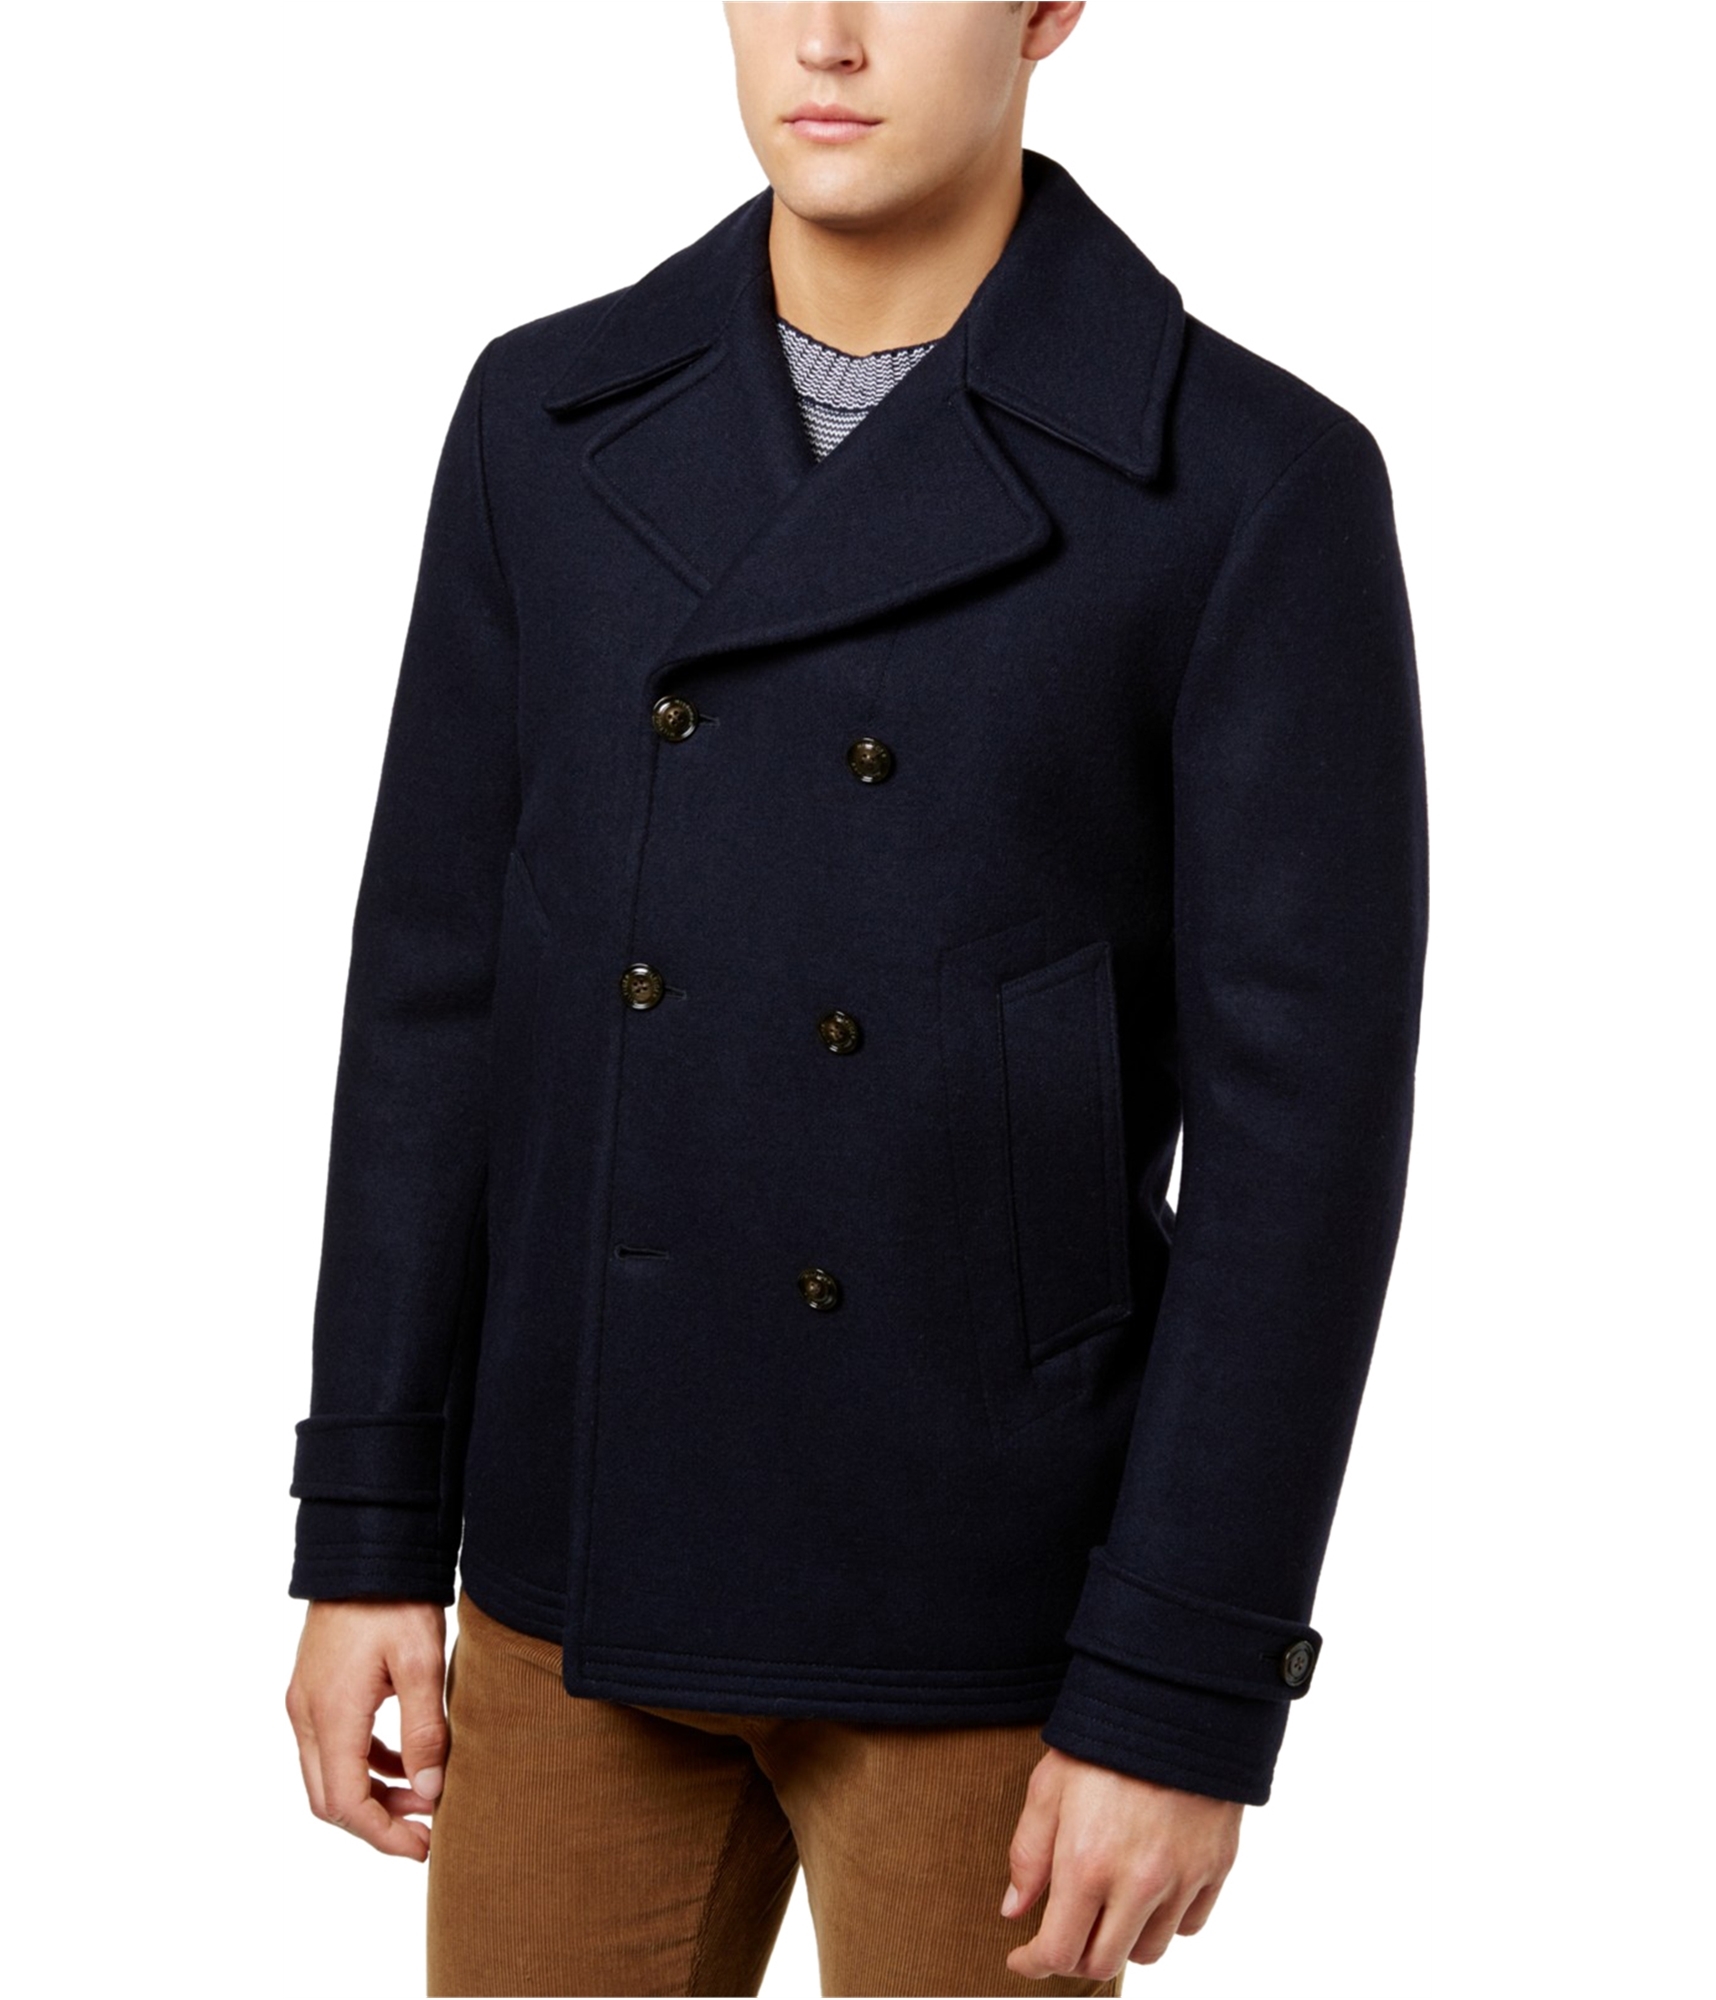 Buy a Tommy Hilfiger Mens Jersey Pea Coat | Tagsweekly